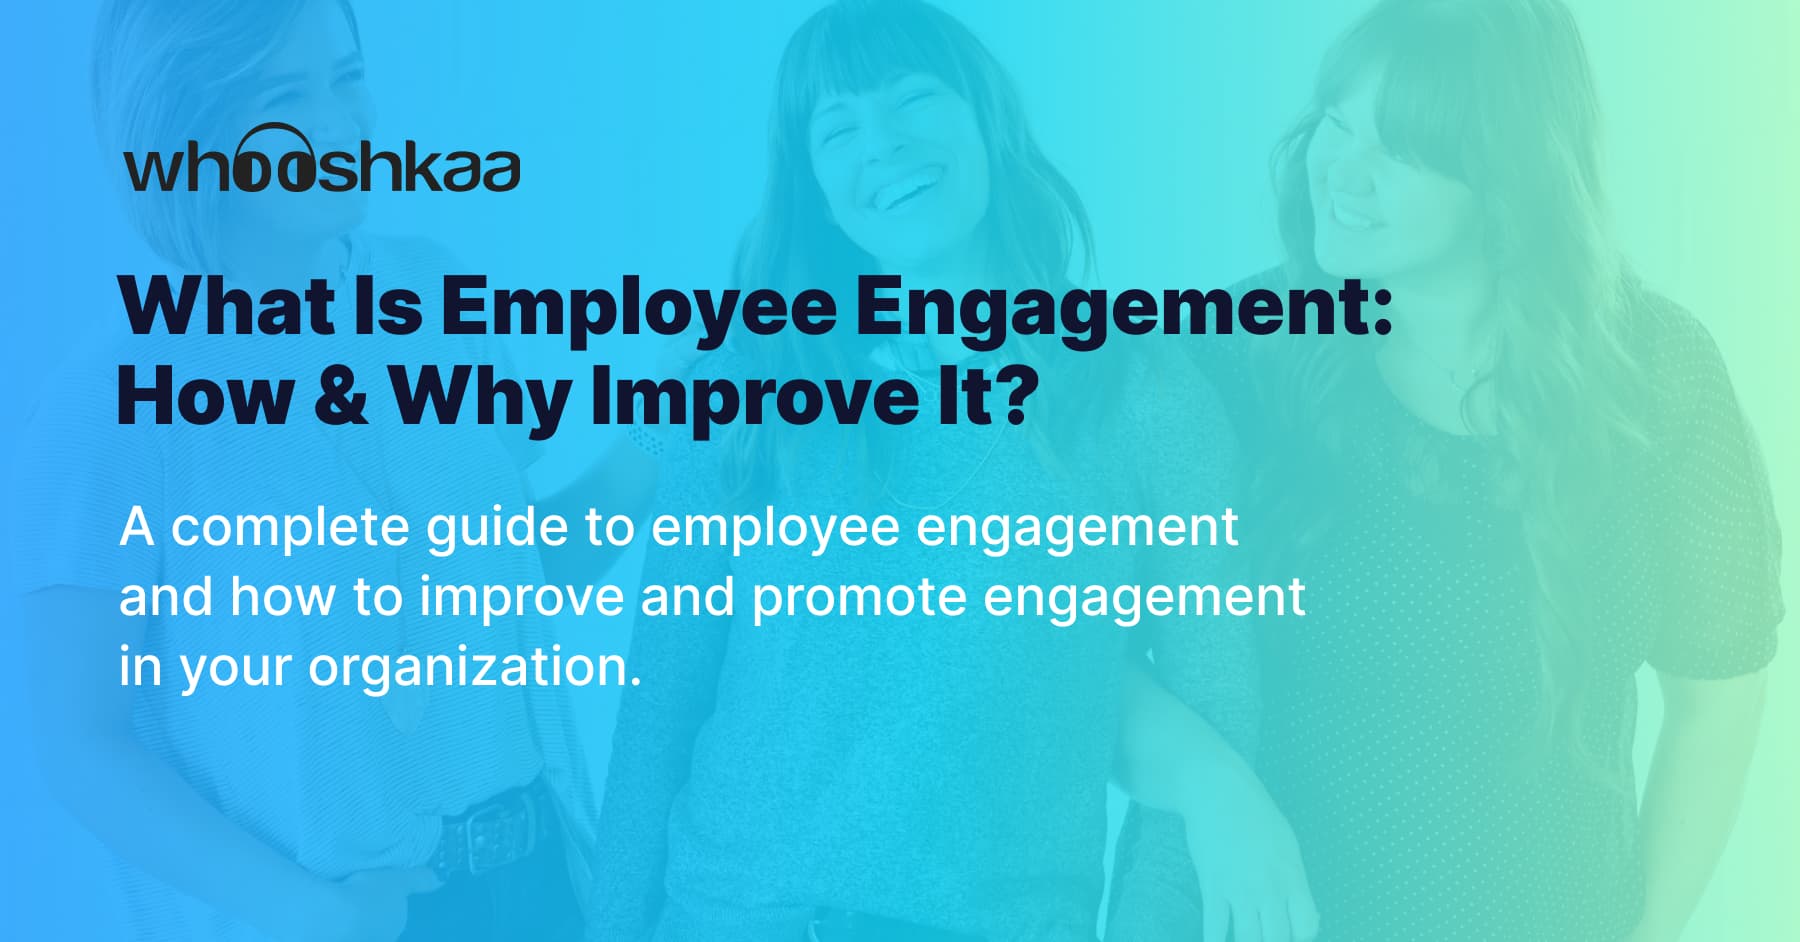 What Is Employee Engagement: How & Why Improve It? | Whooshkaa